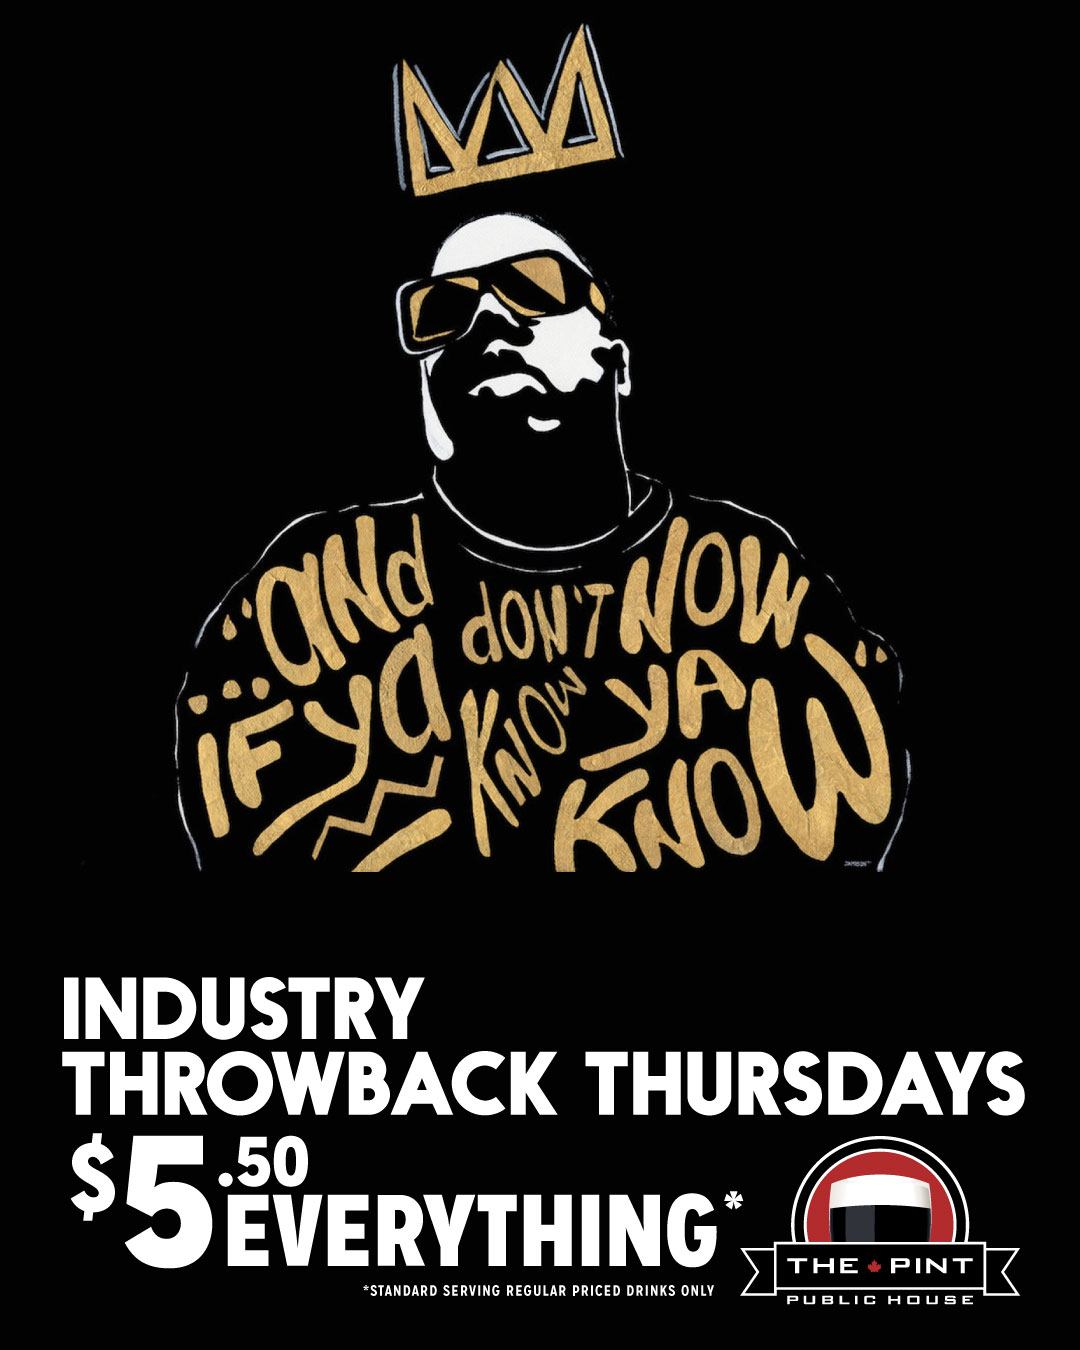 Industry Throwback Thursday promo | The Pint Vancouver